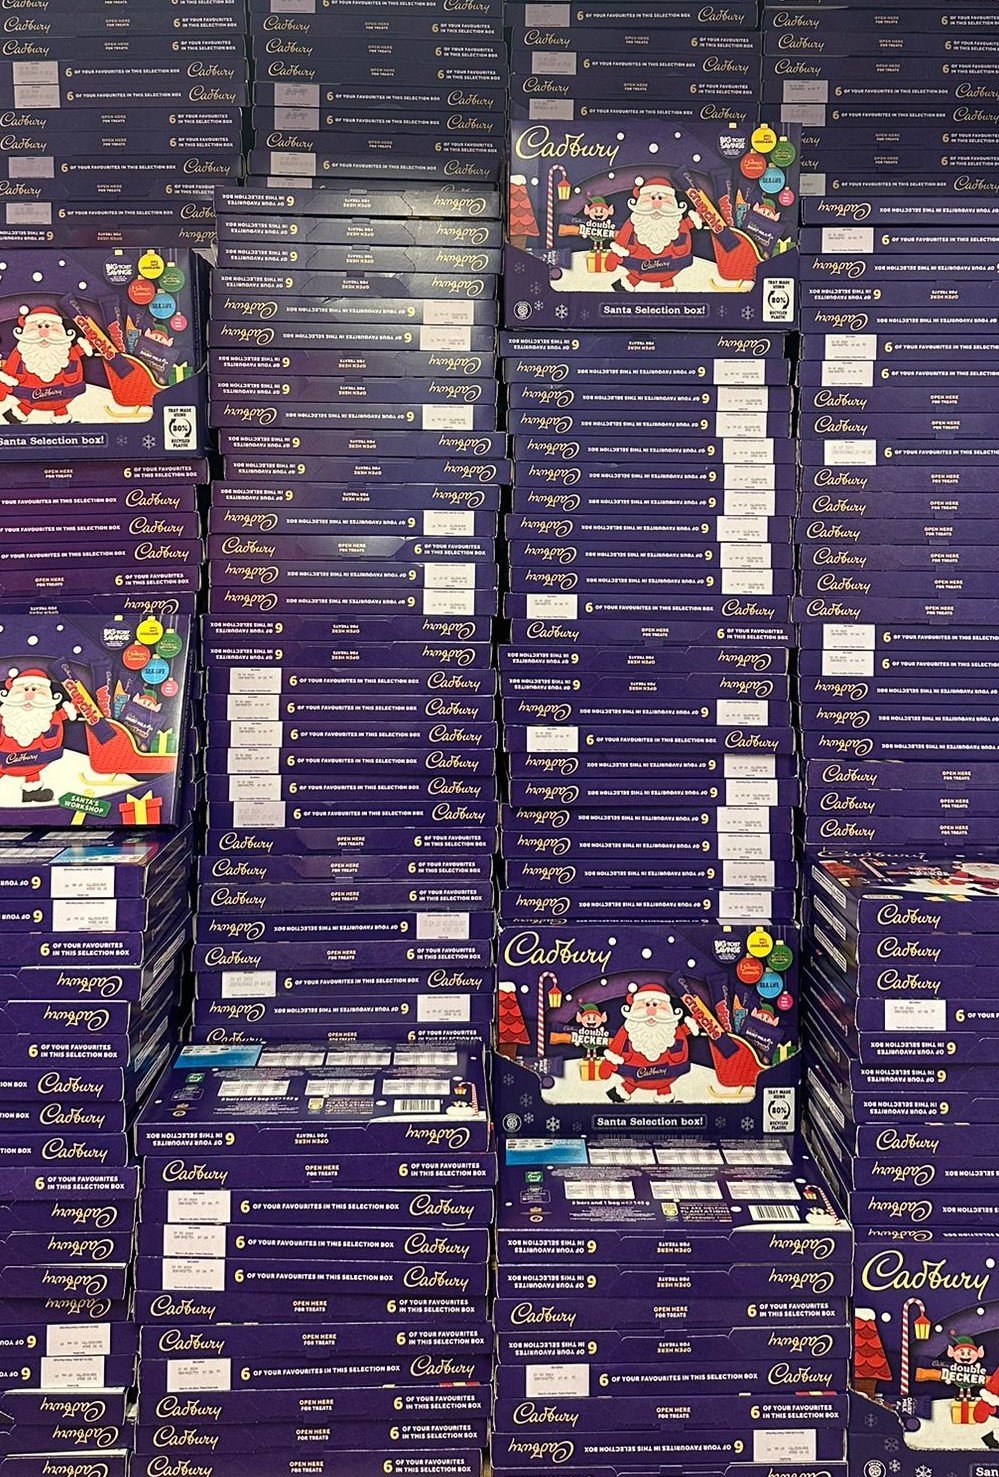 unwrapped boxes.jpeg